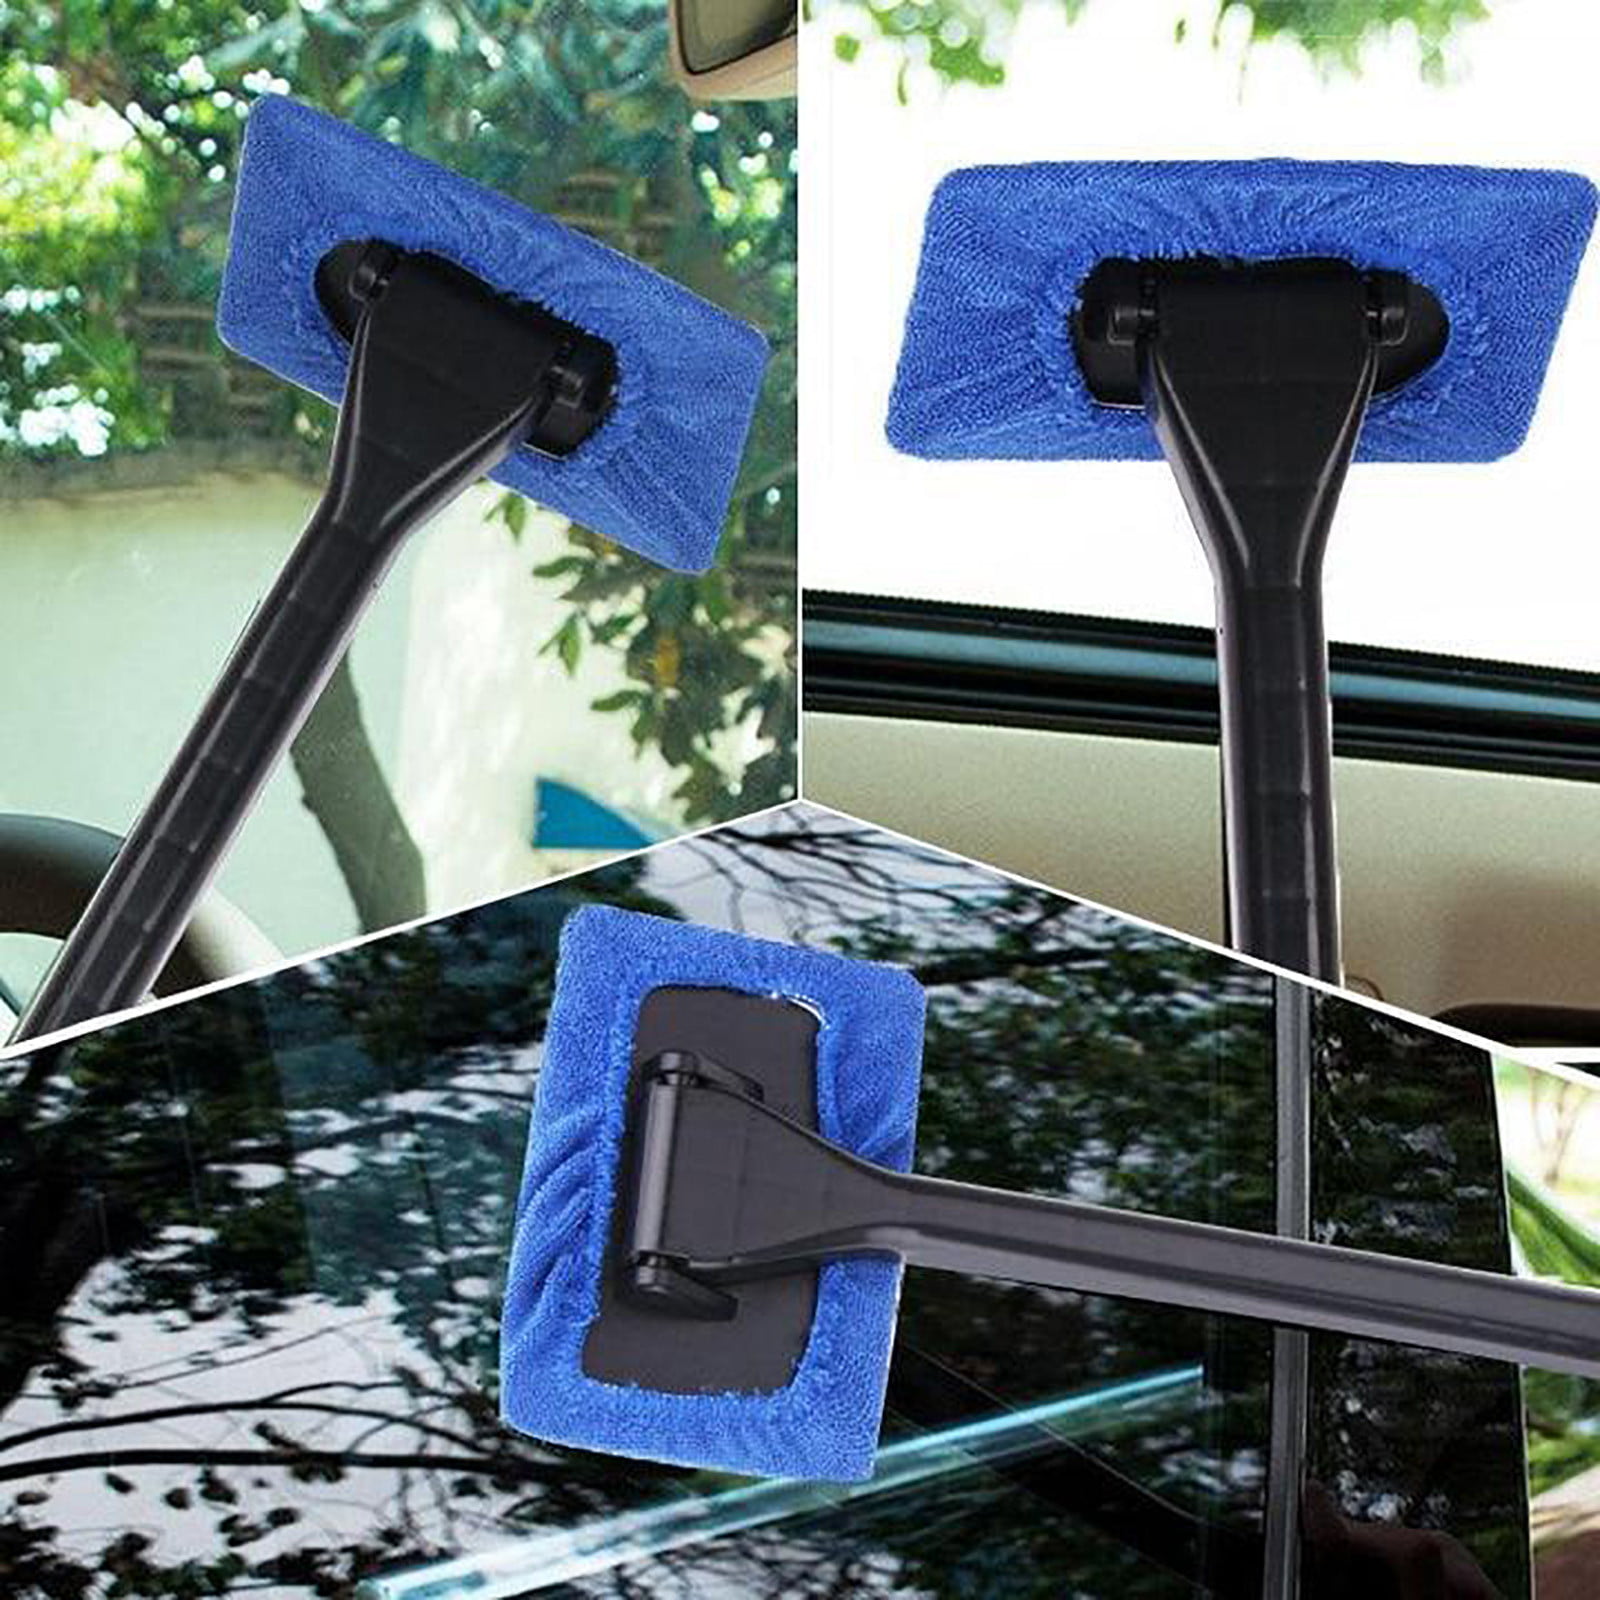 Kewucn Car Windshield Cleaning Tool and Glass Defogging Brush, Retractable  ABS Plastic Handle & Fine Fiber Auto Glass Cleaning Brush, Universal Car